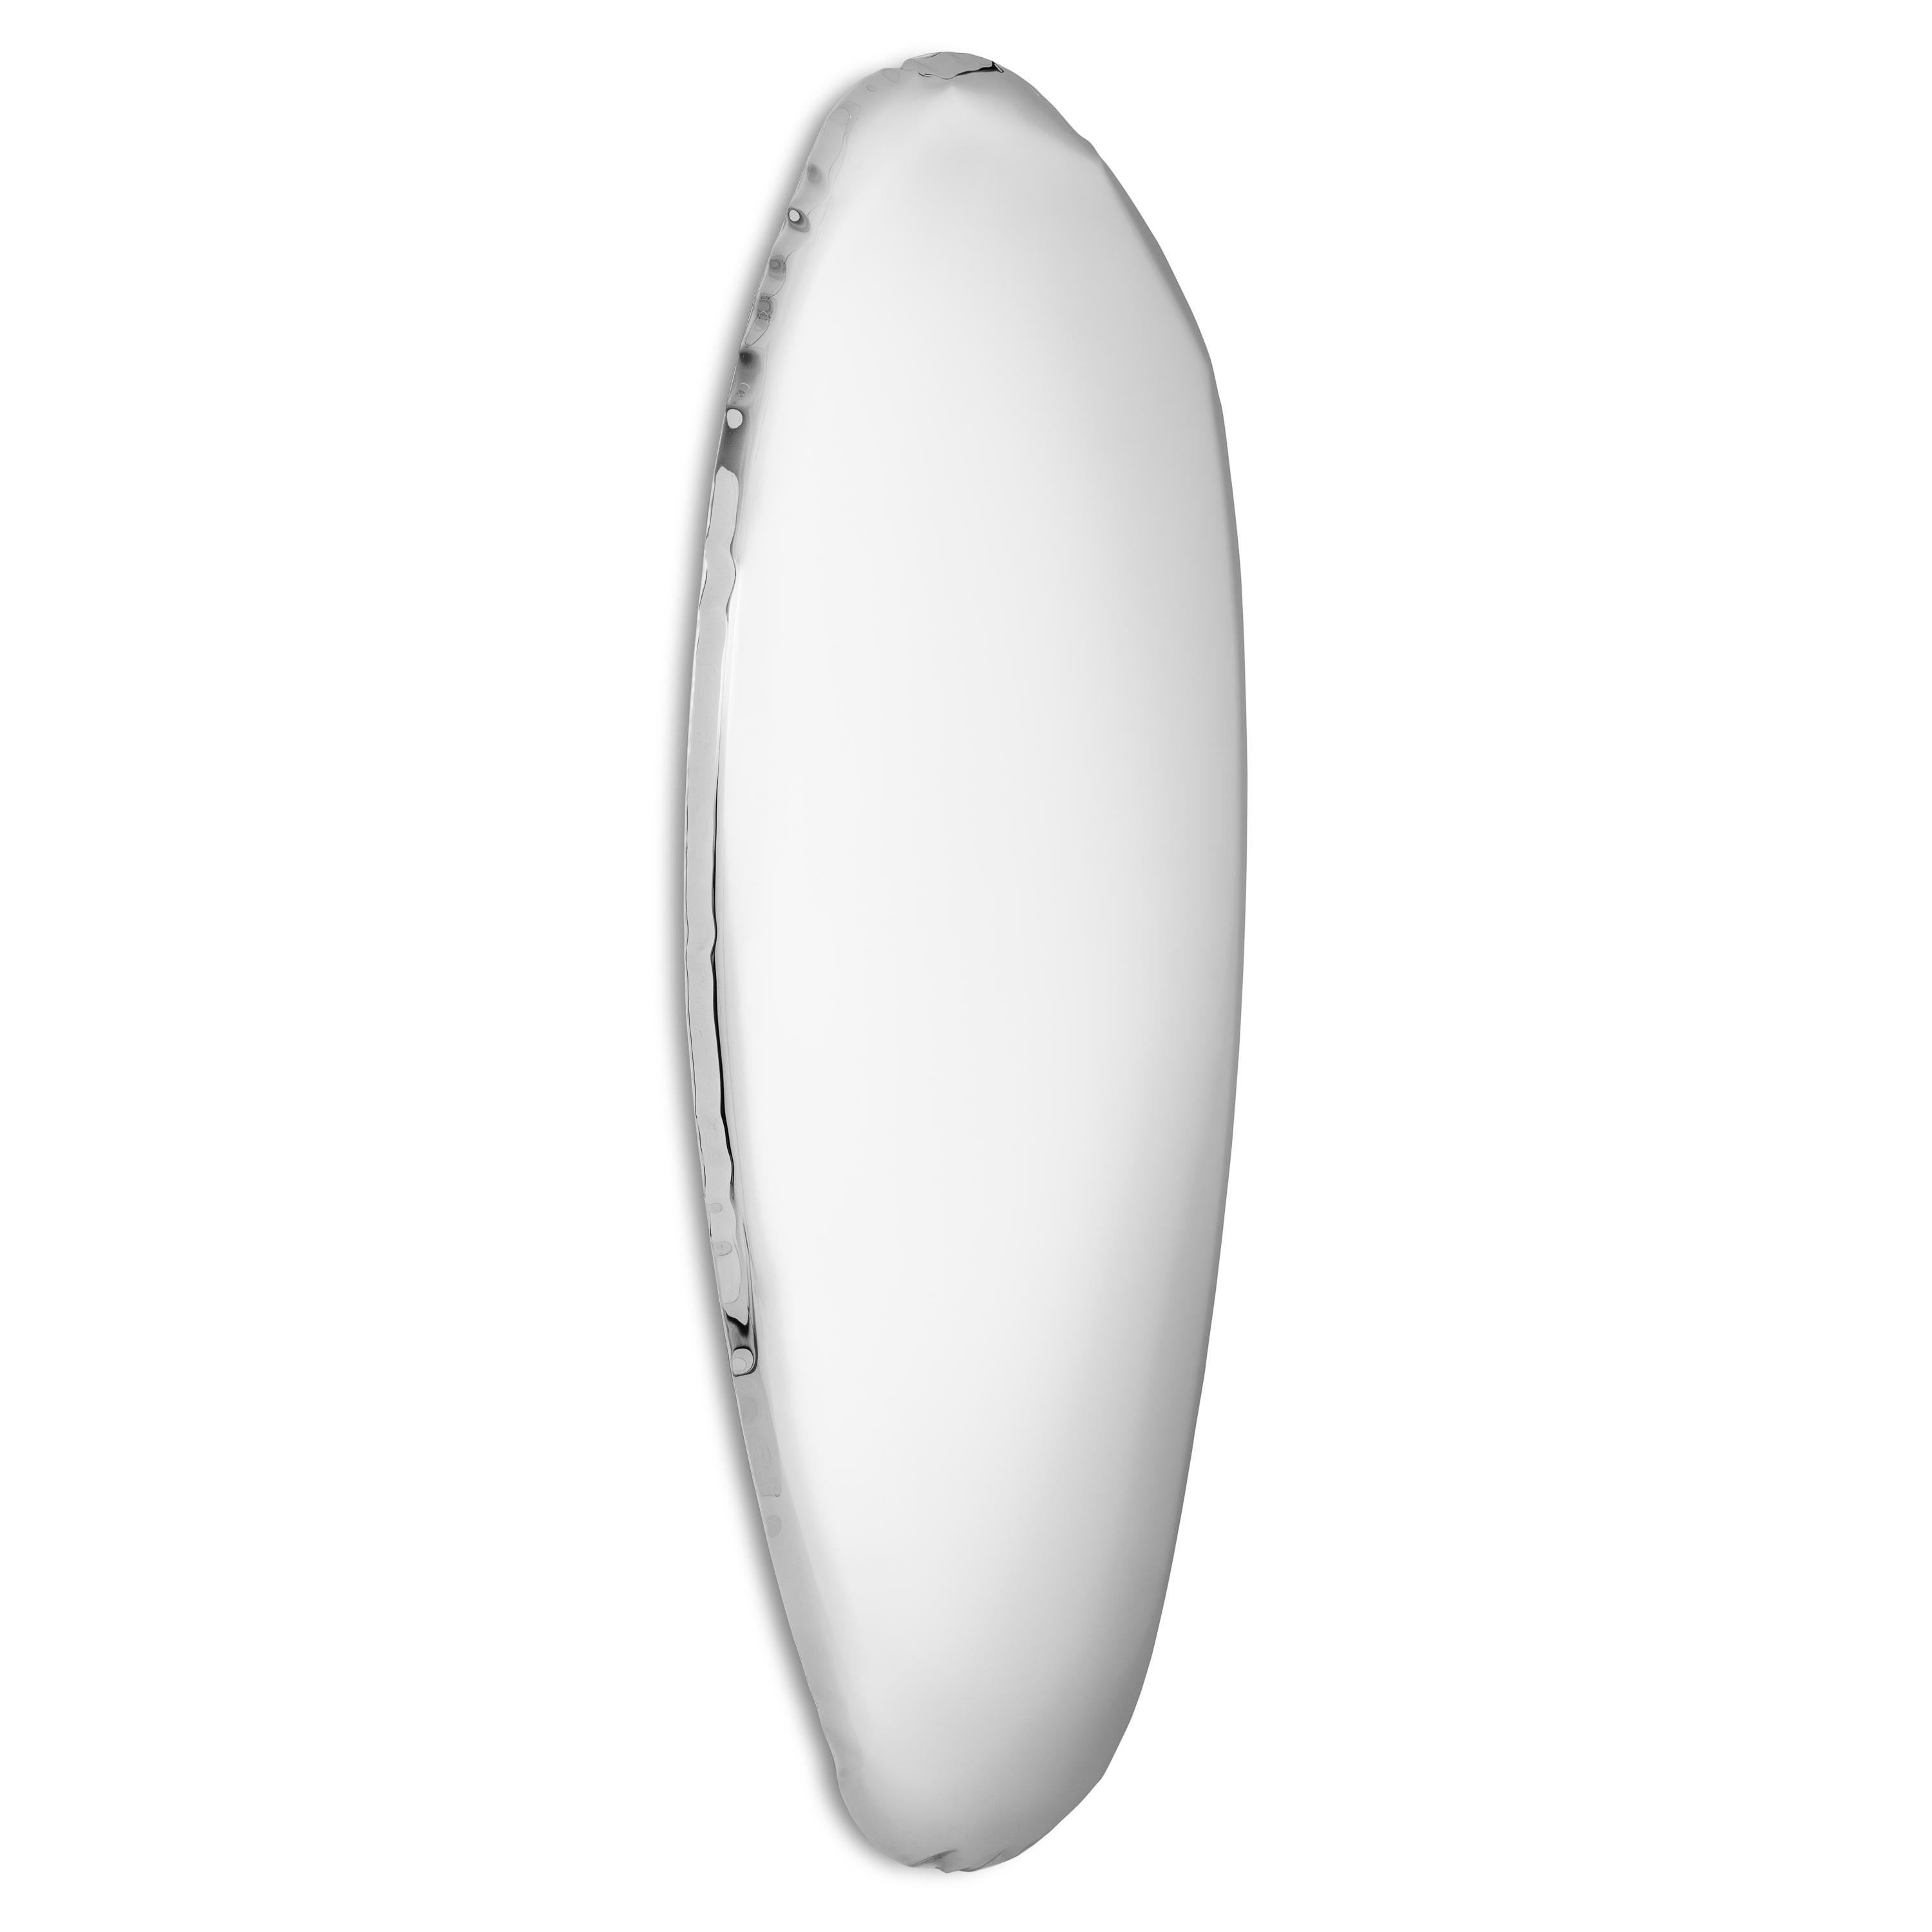 Stainless steel tafla O1 wall mirror by Zieta
Dimensions: D 6 x W 100 x H 225 cm 
Material: Stainless steel.
Finish: Polished. 
Available finishes: Stainless steel, white matt, sapphire/emerald, sapphire, emerald, deep space blue, dark matter, or